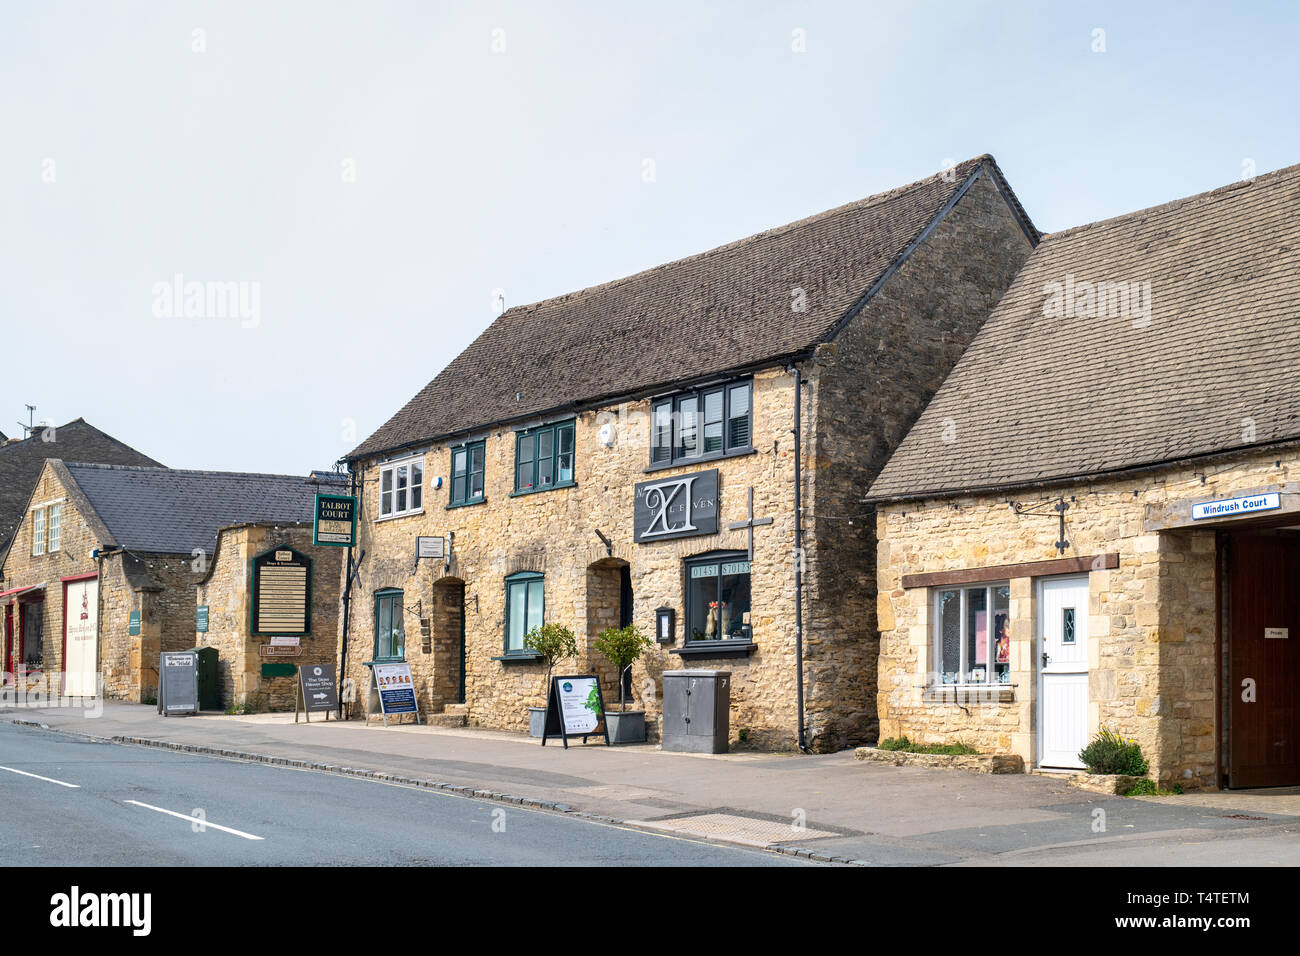 Cotswold stone buildings along Sheep street, Stow on the Wold, Cotswolds, Gloucestershire, England Stock Photo